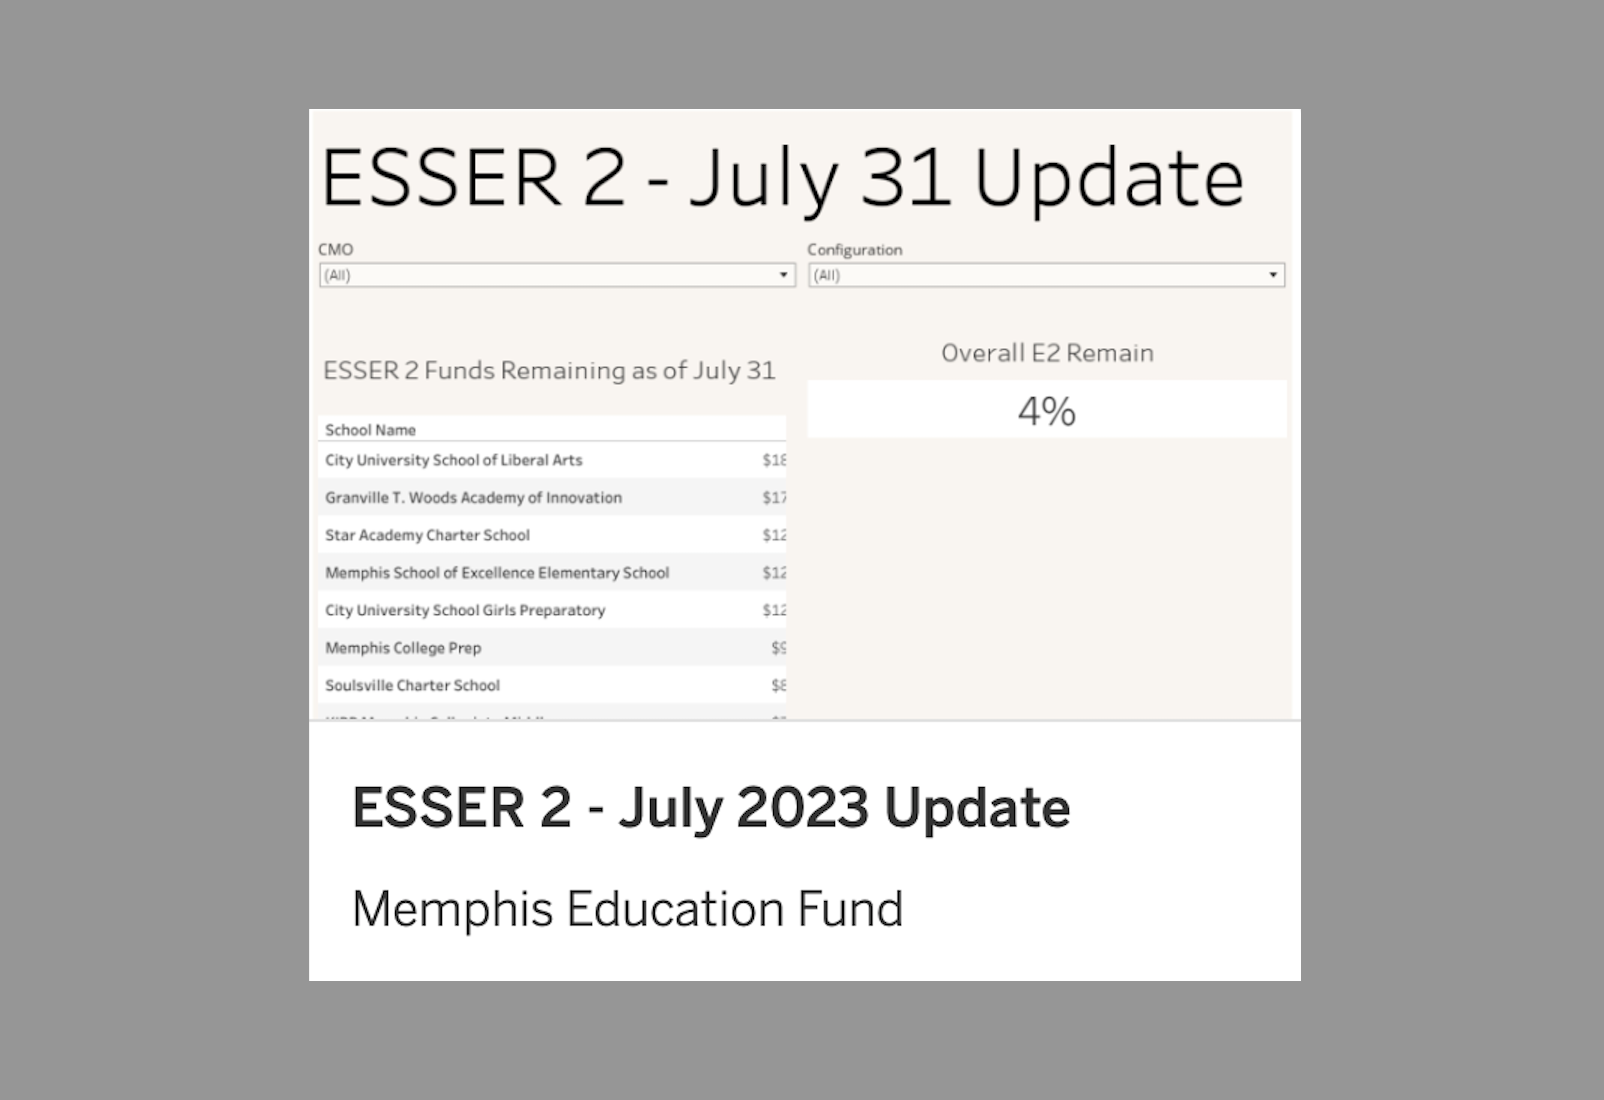 MSCS Charters – Spending on Federal Relief ESSER Funds